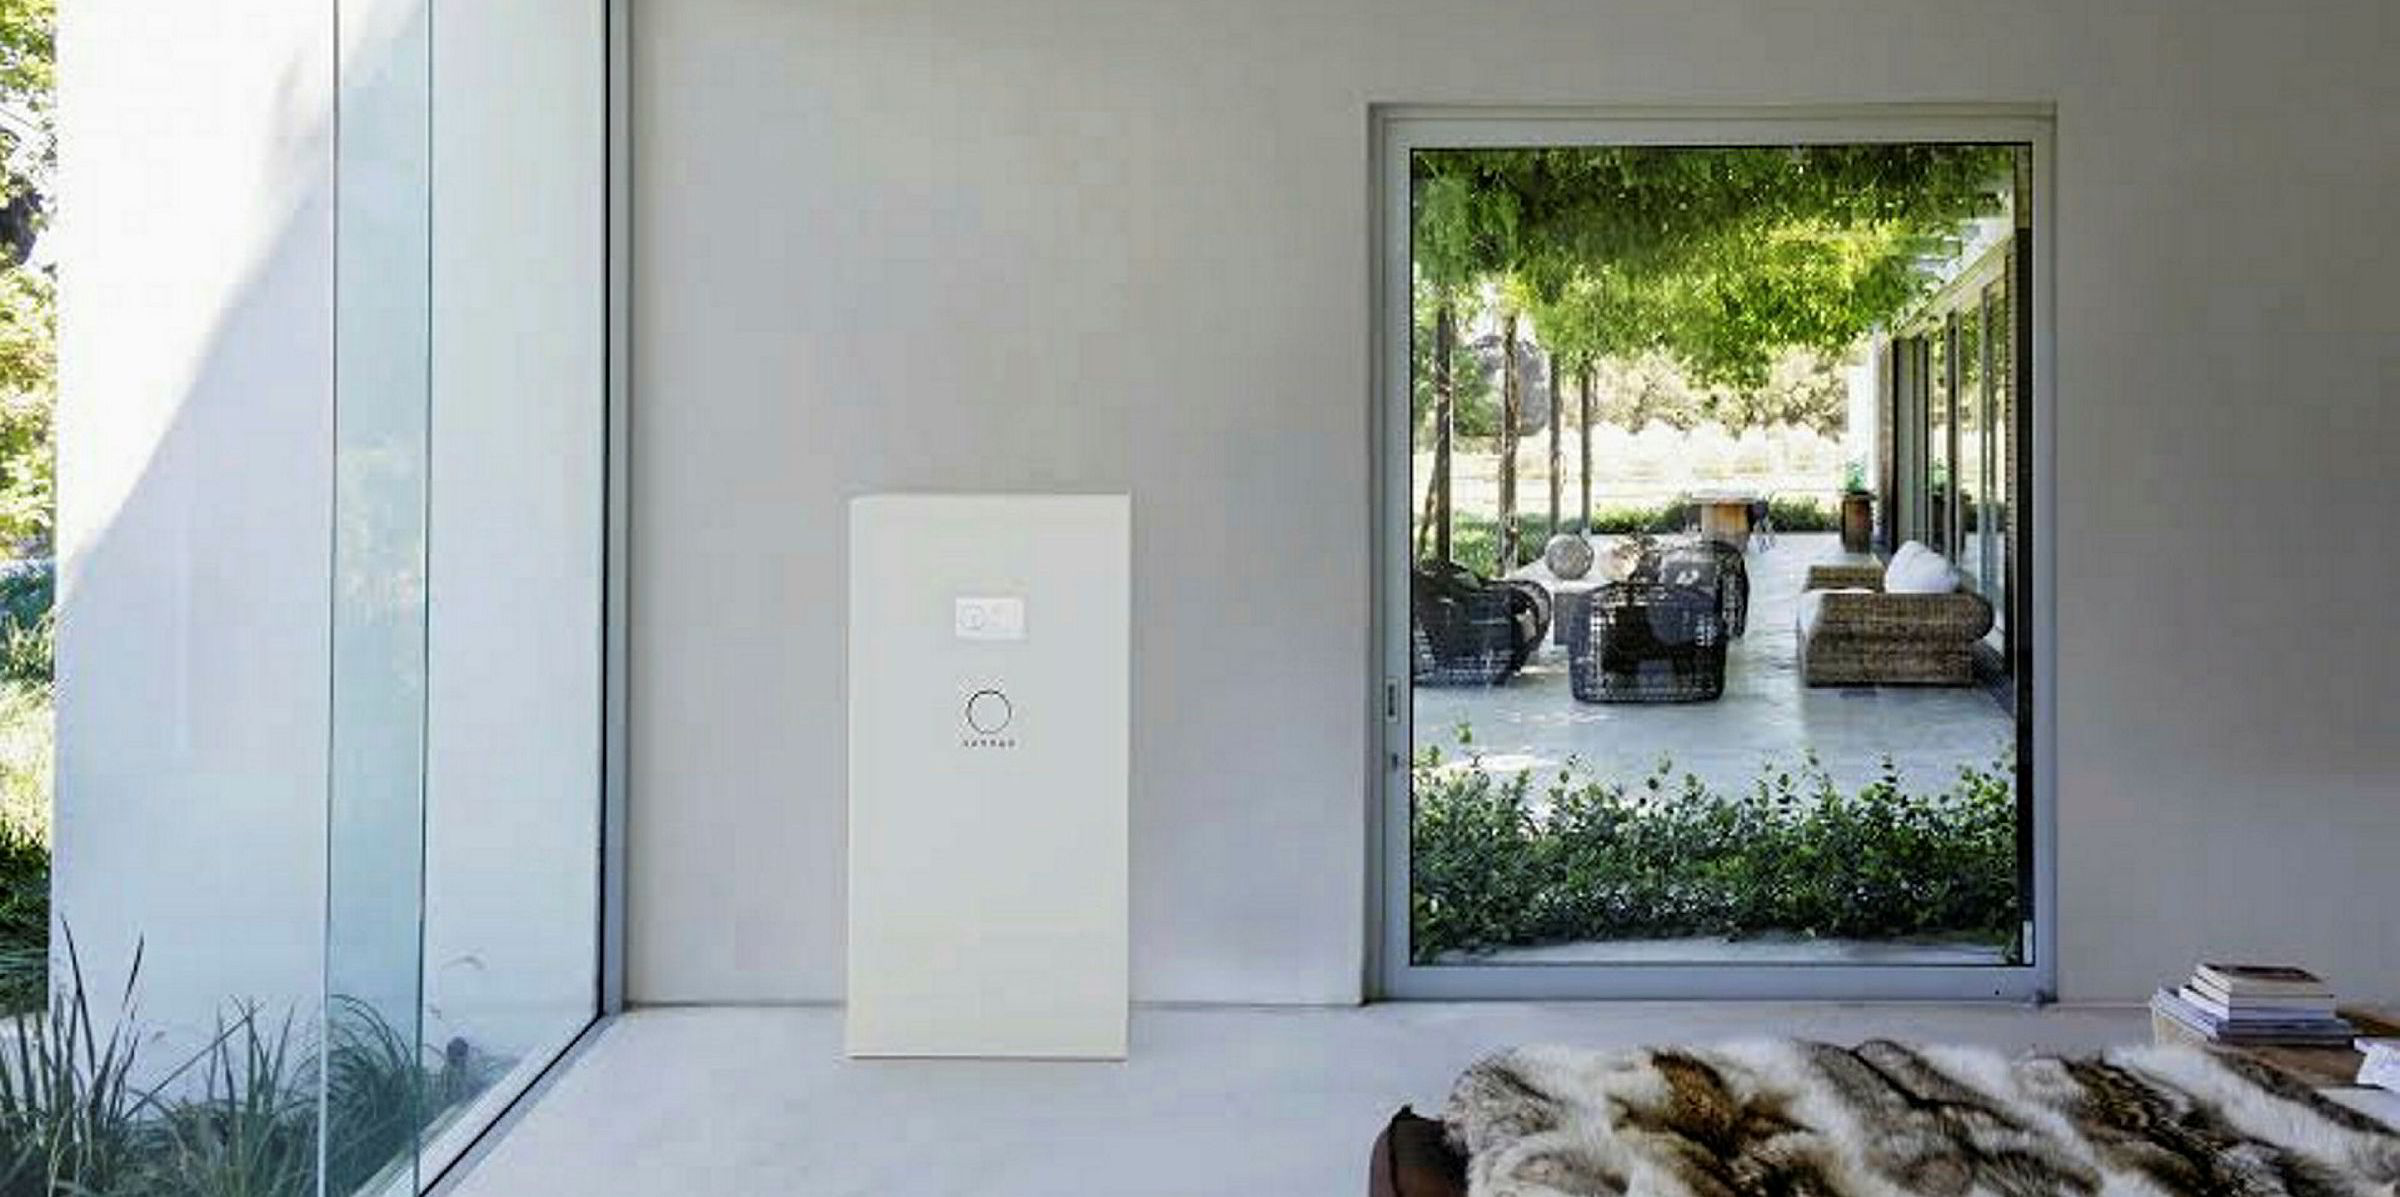 Home battery. Tesla Powerwall. Home Energy Storage. Home Energy Storage System.